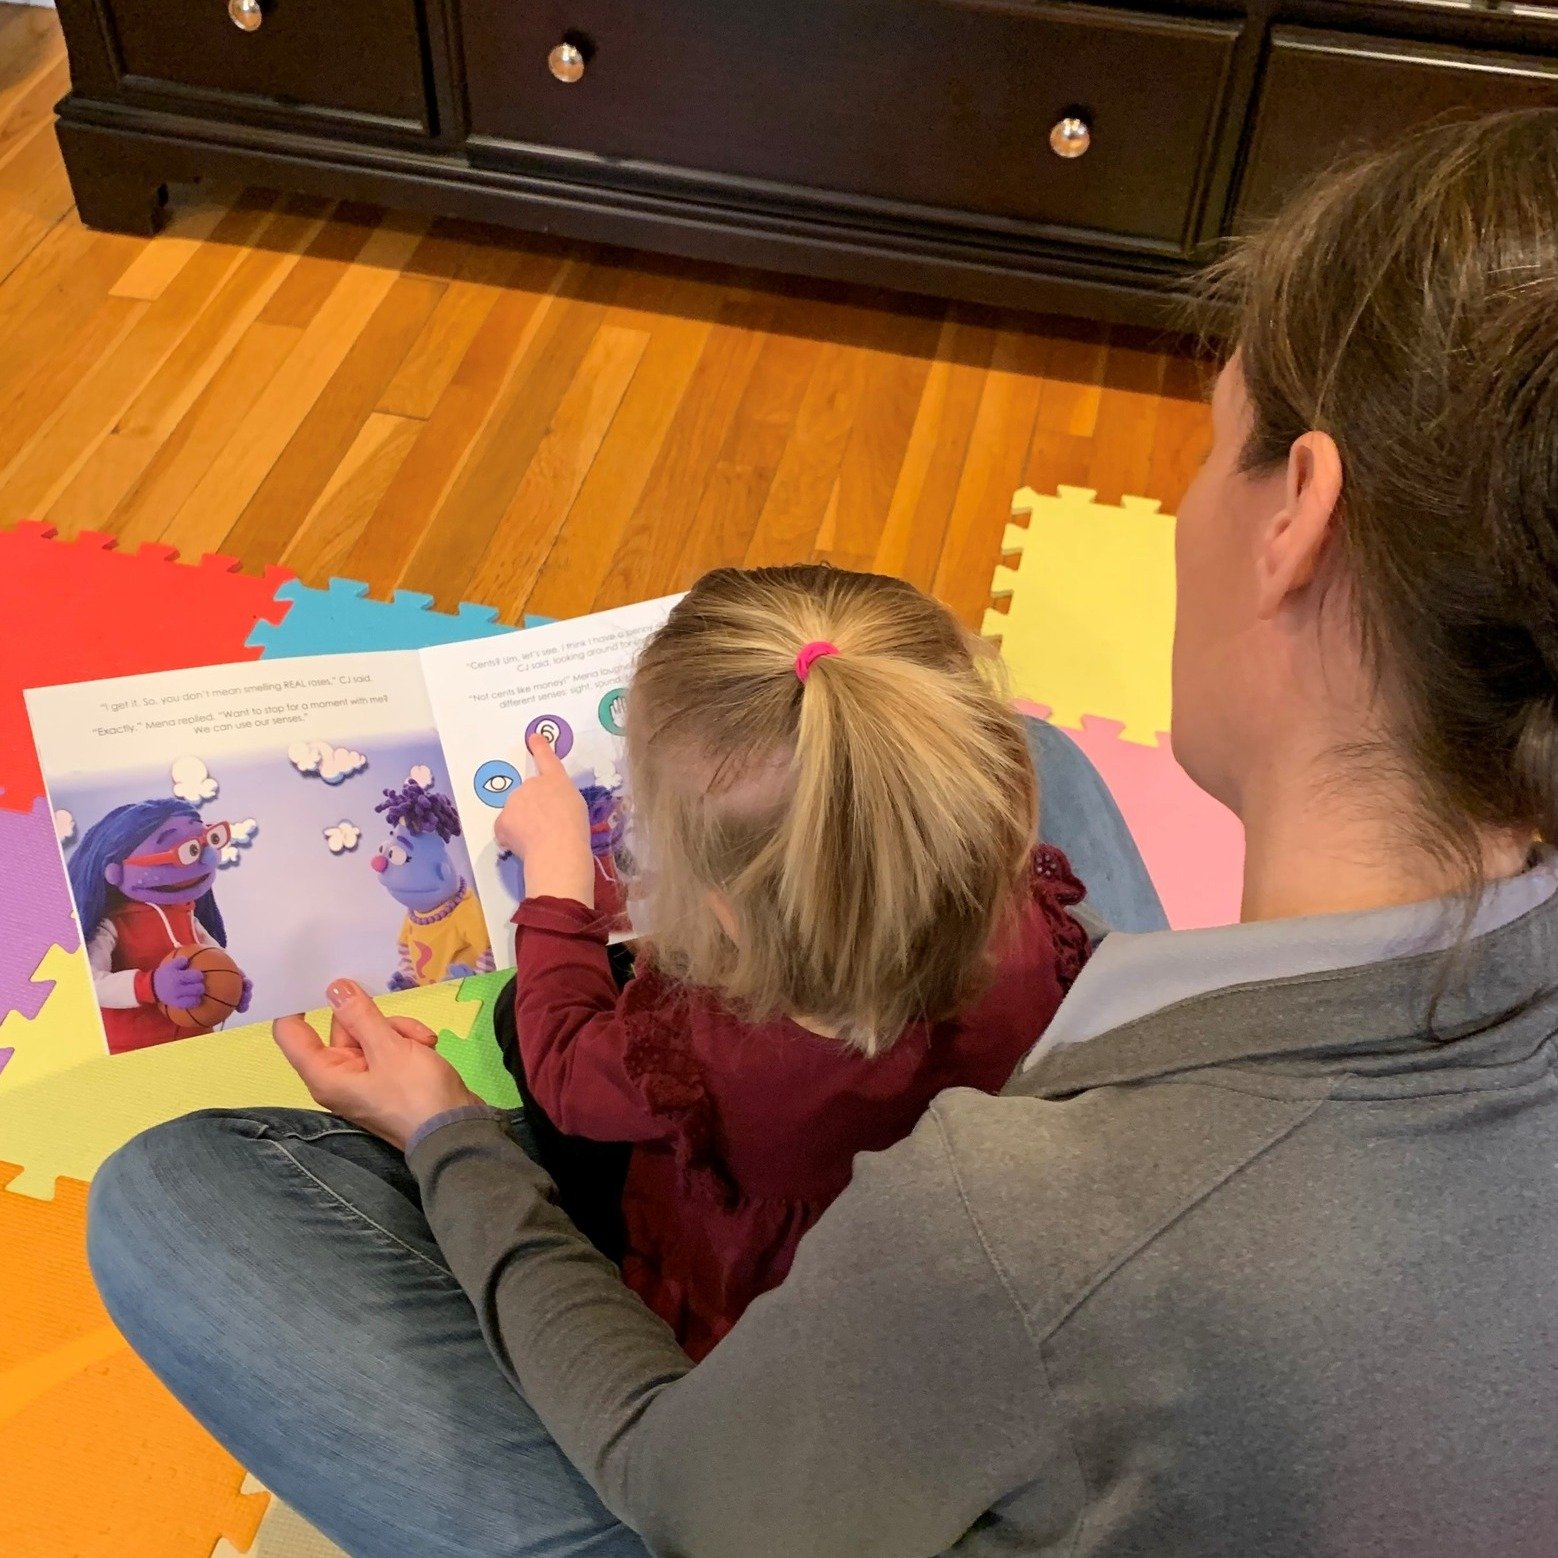 Shout out to all those moms - today and everyday - who have spent hours reading with their little ones! Link to the FYBS storybooks in our bio.